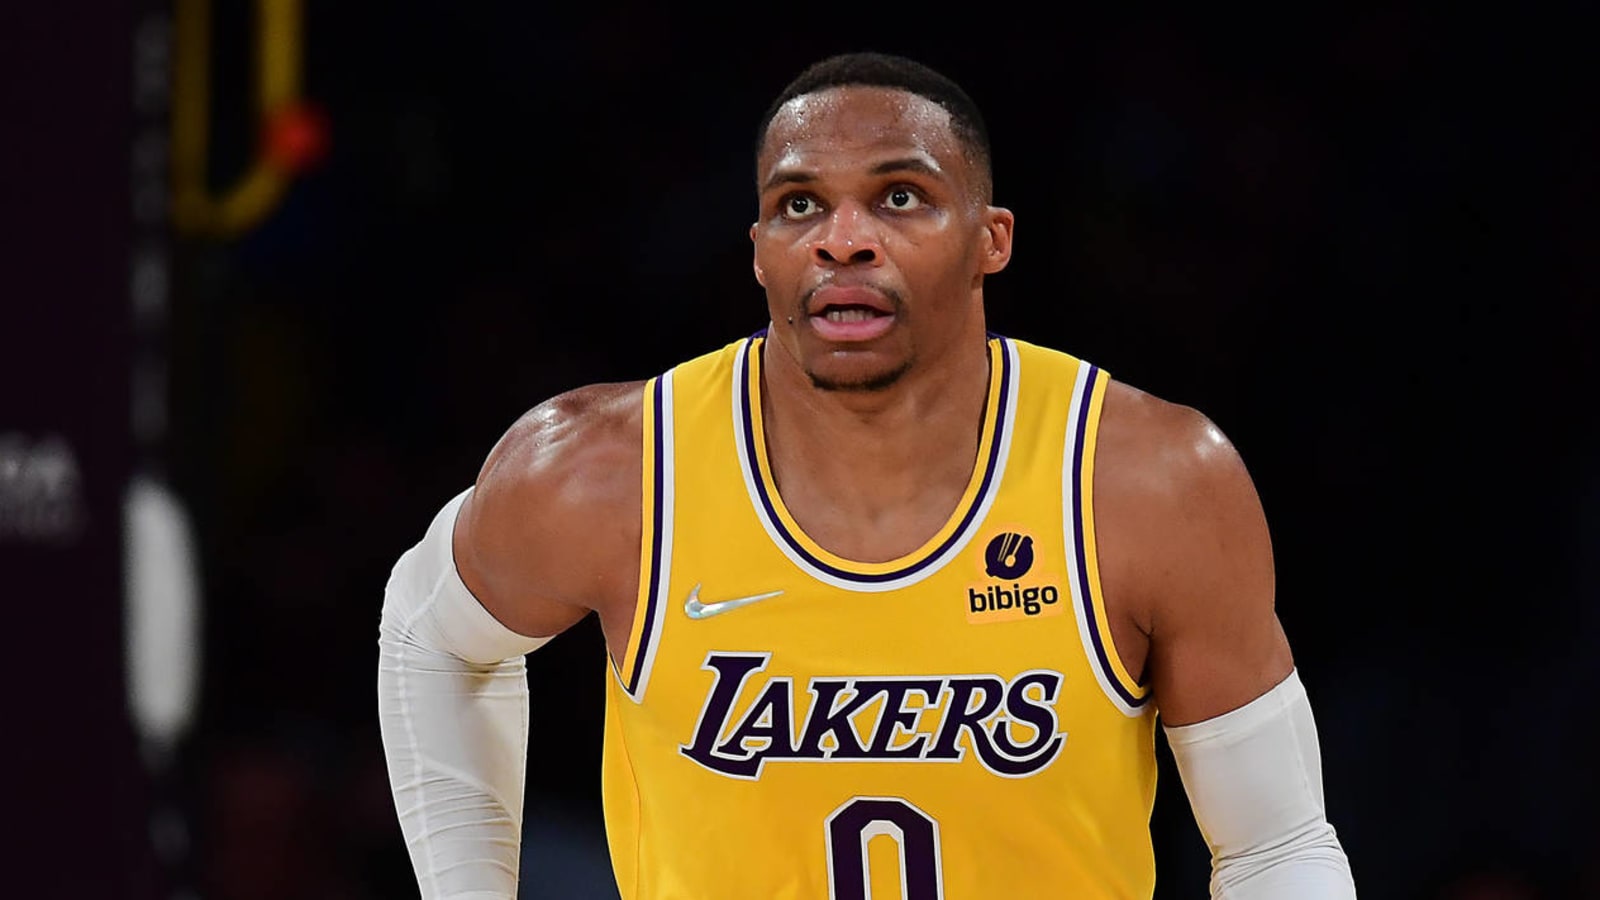 Watch: Russell Westbrook was frustrated with reporter after Lakers’ loss